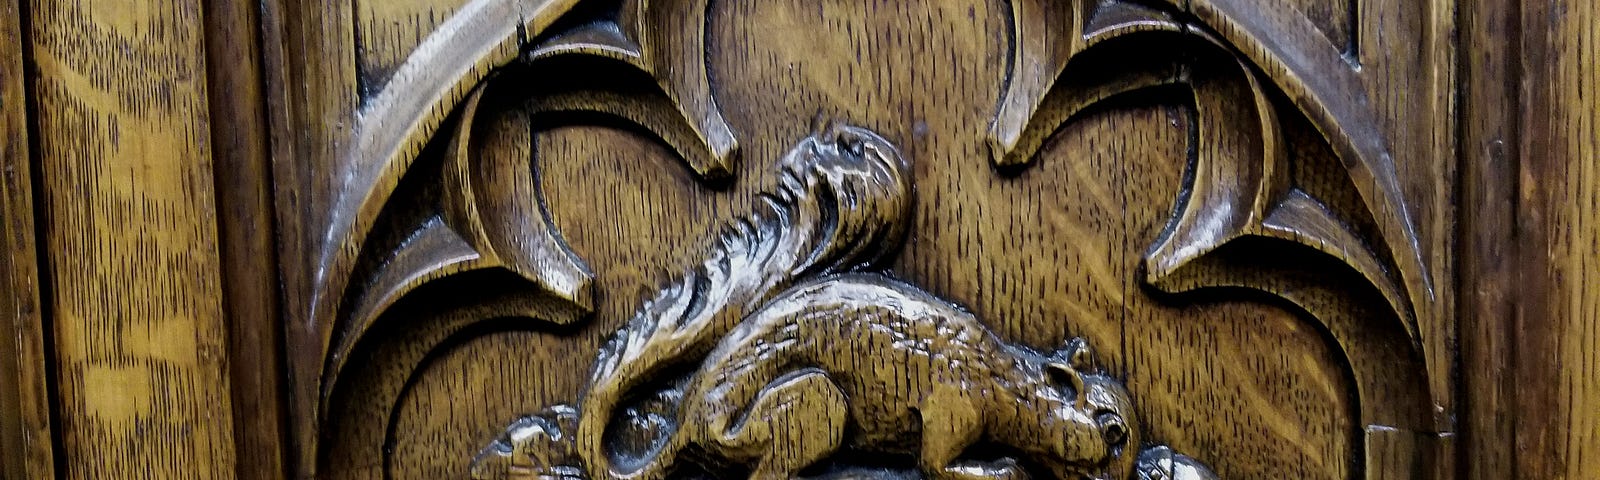 Wood carving of a squirrel with a nut from Canada’s new parliament.